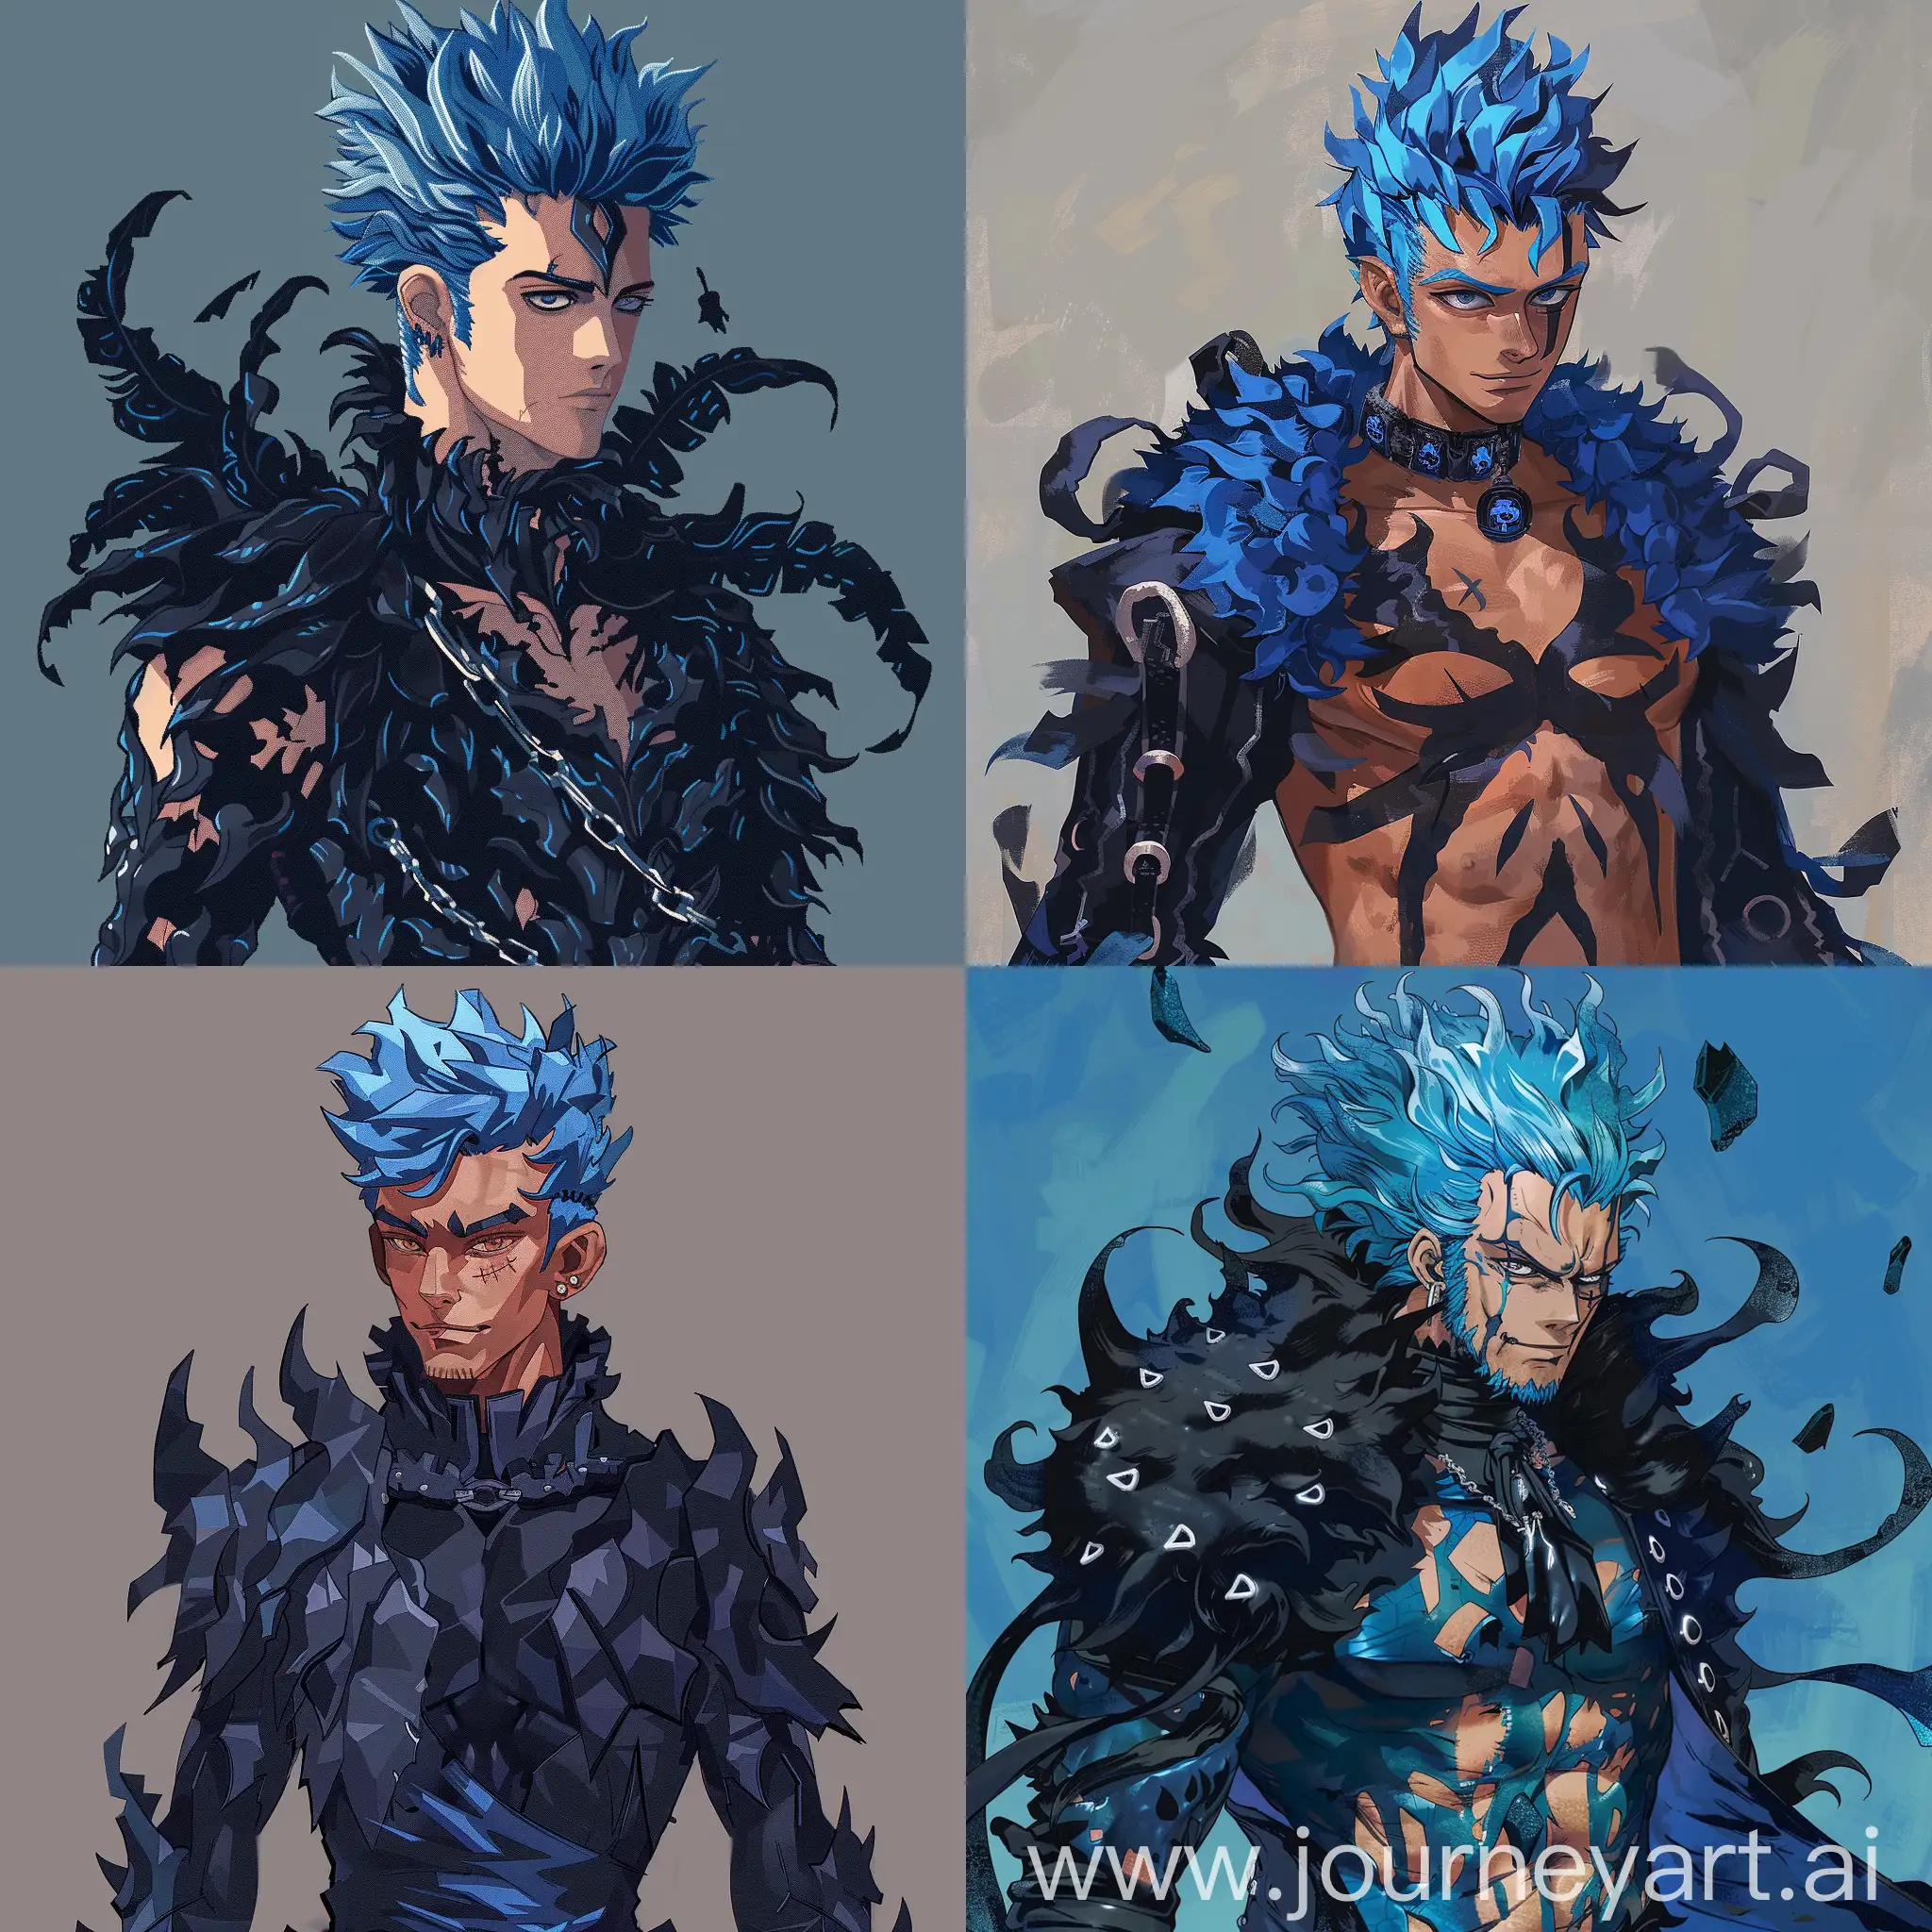 BlueHaired-Male-Protagonist-in-Unique-Black-and-Dark-Blue-Costume-Pixel-Art